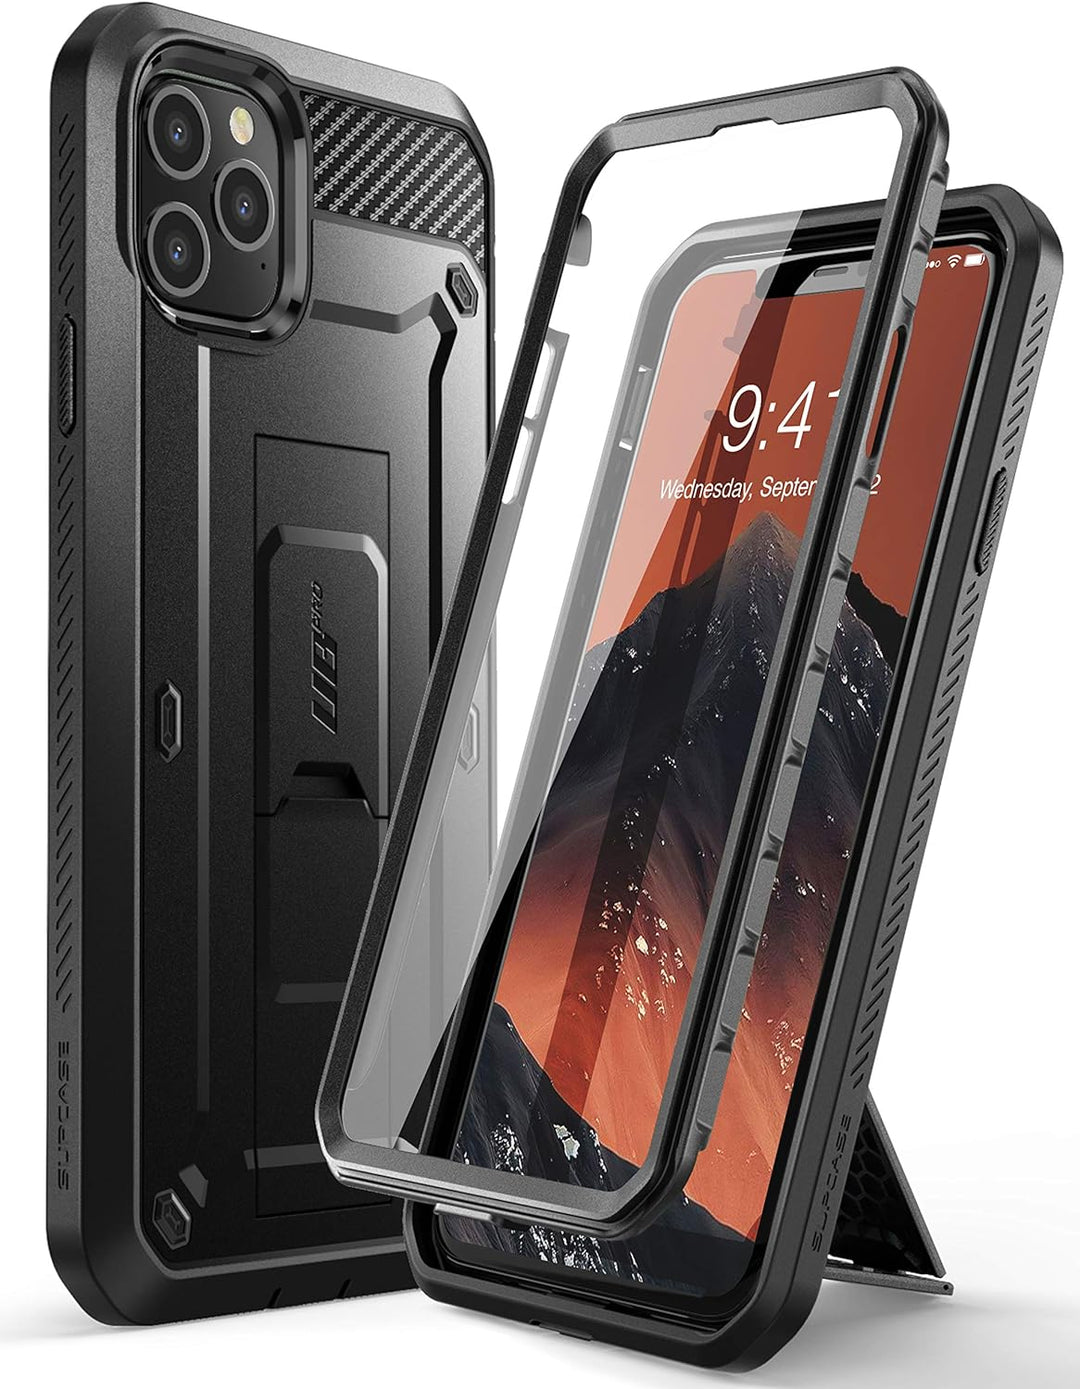 Supcase Beetle Pro Case for iPhone 11 Pro 5.8 Inch, Built-In Screen Protector Black